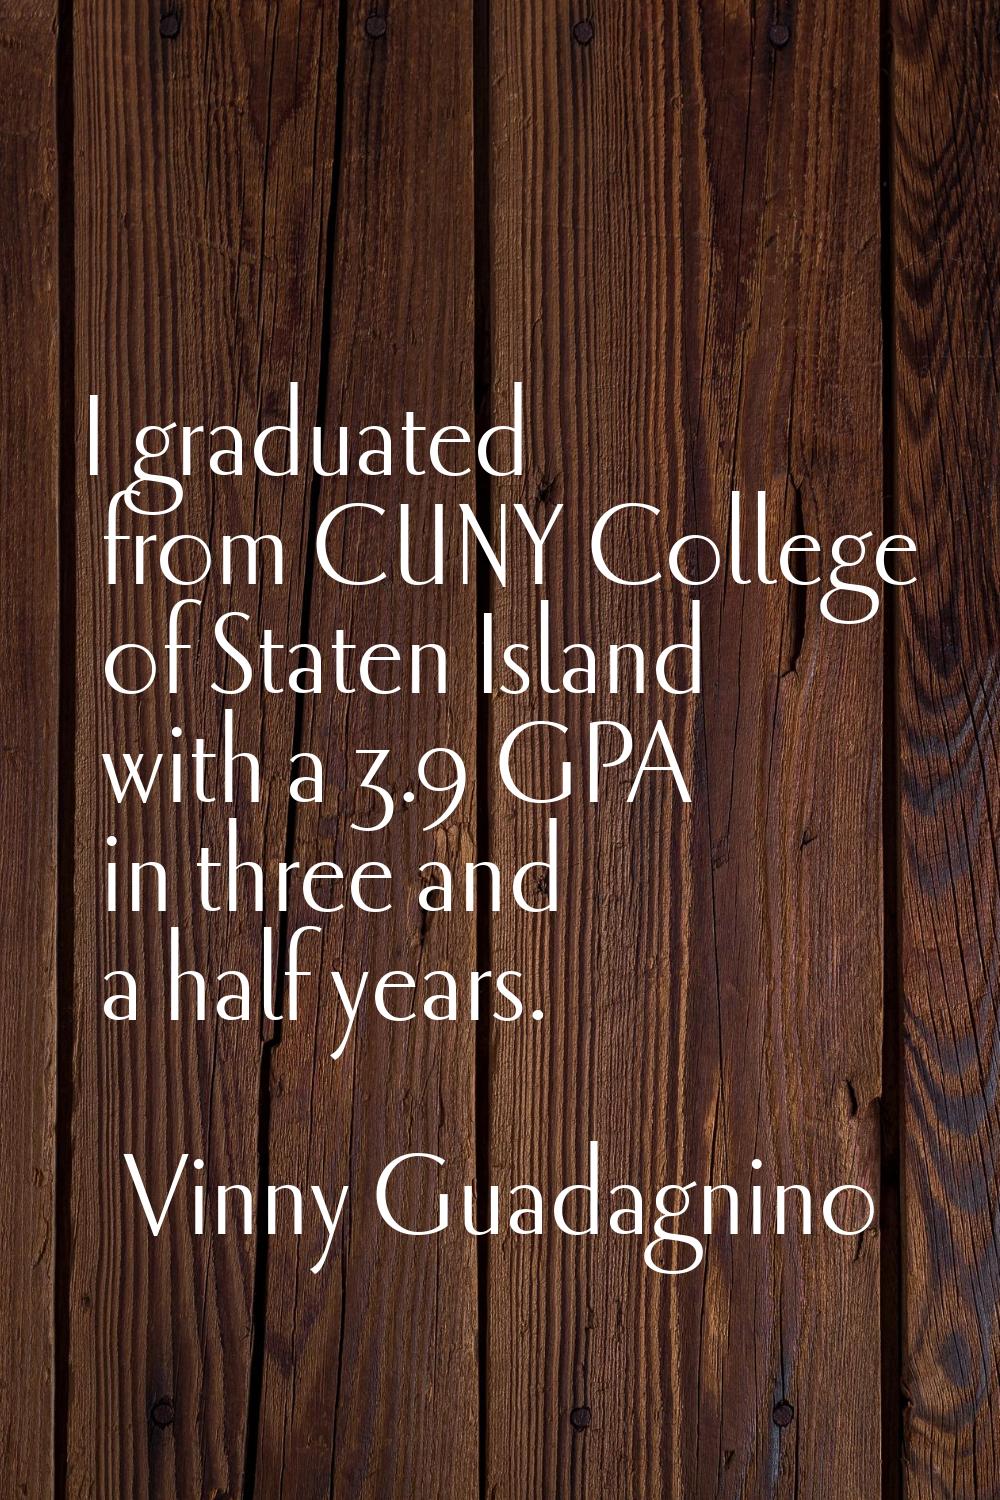 I graduated from CUNY College of Staten Island with a 3.9 GPA in three and a half years.